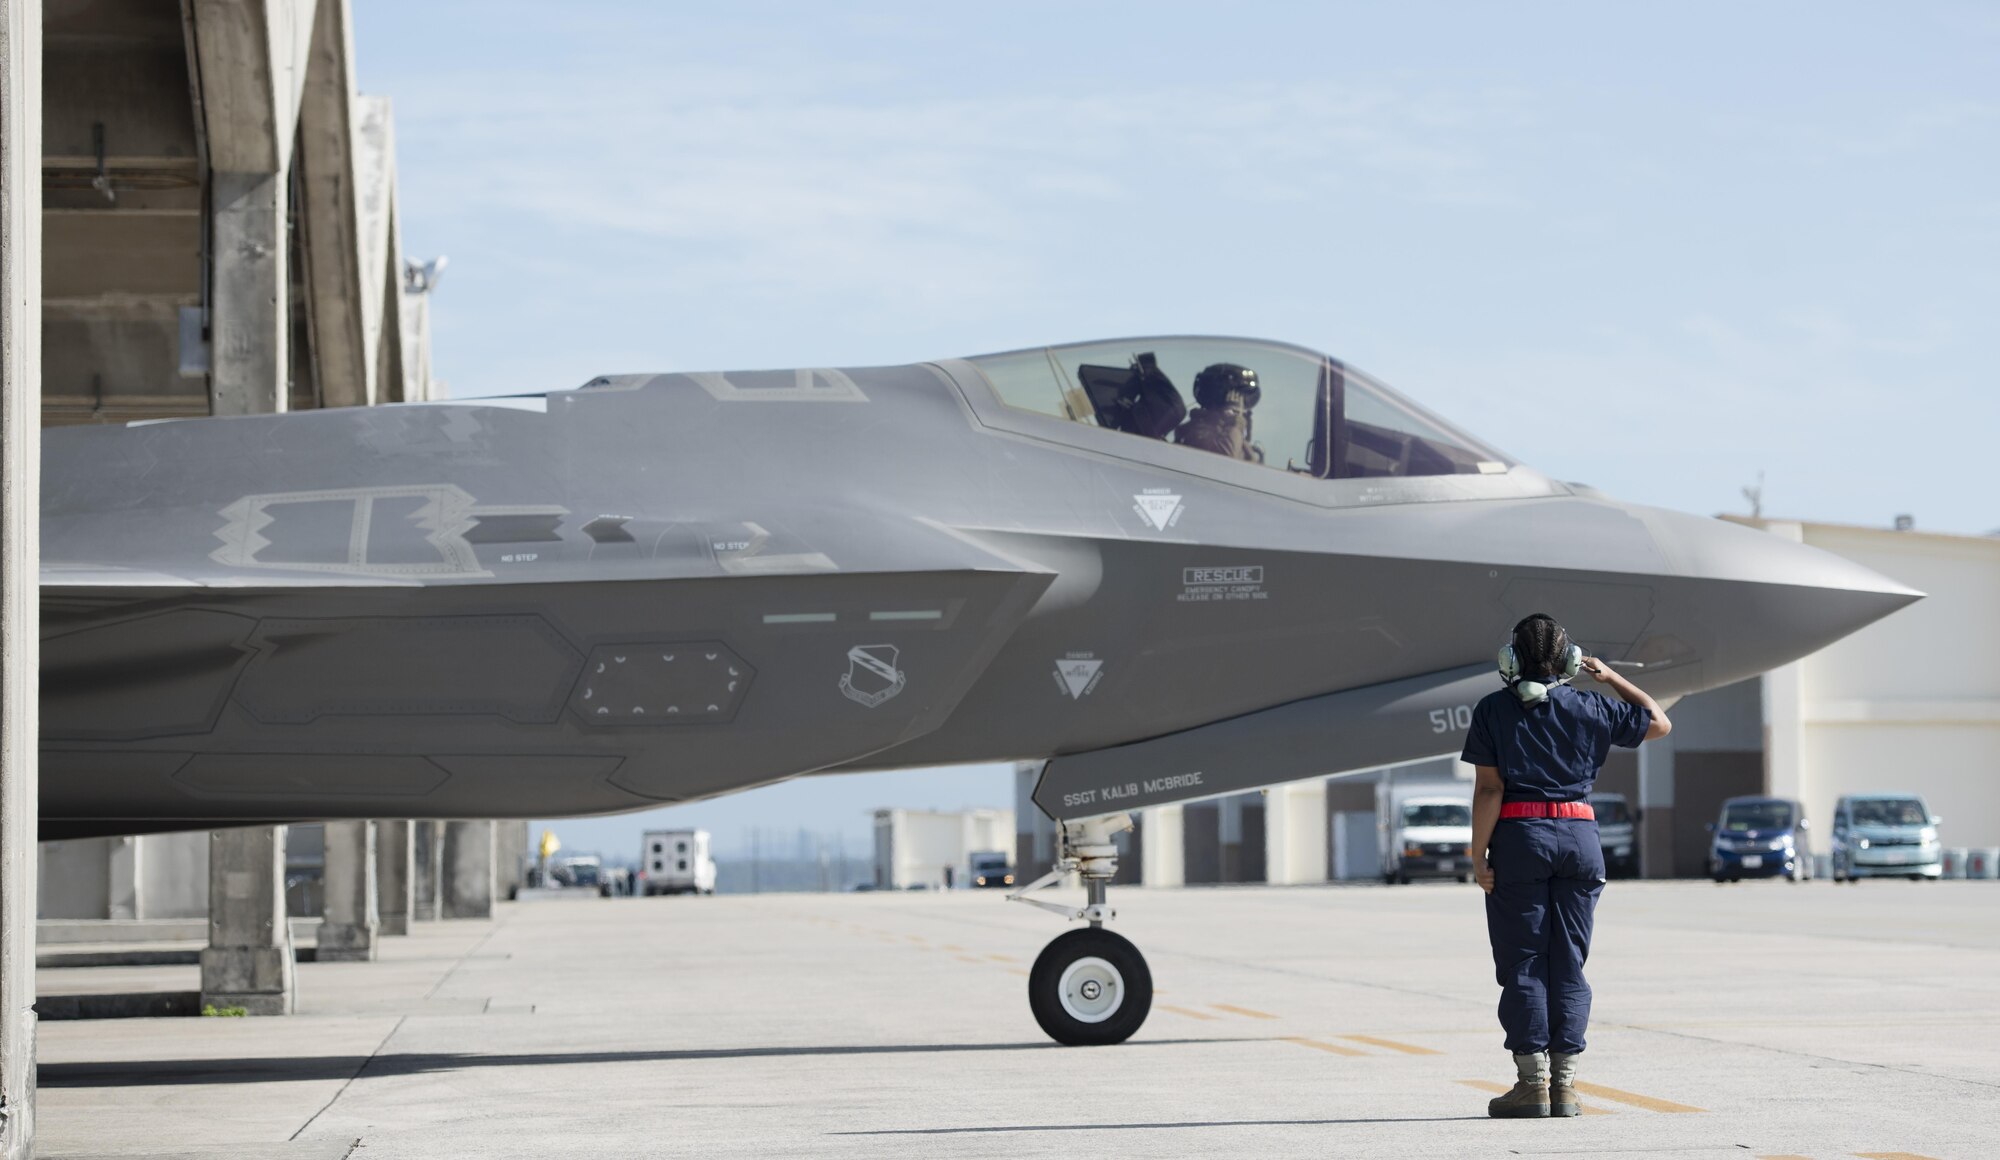 A U.S. Air Force F-35A Lightning II from Hill Air Force Base, Utah, taxis for take-off at Kadena Air Base, Japan, Nov. 7, 2017. The F-35A is deployed under U.S. Pacific Command’s theater security package program, which has been in operation since 2004. (U.S. Air Force photo by Senior Airman Omari Bernard)